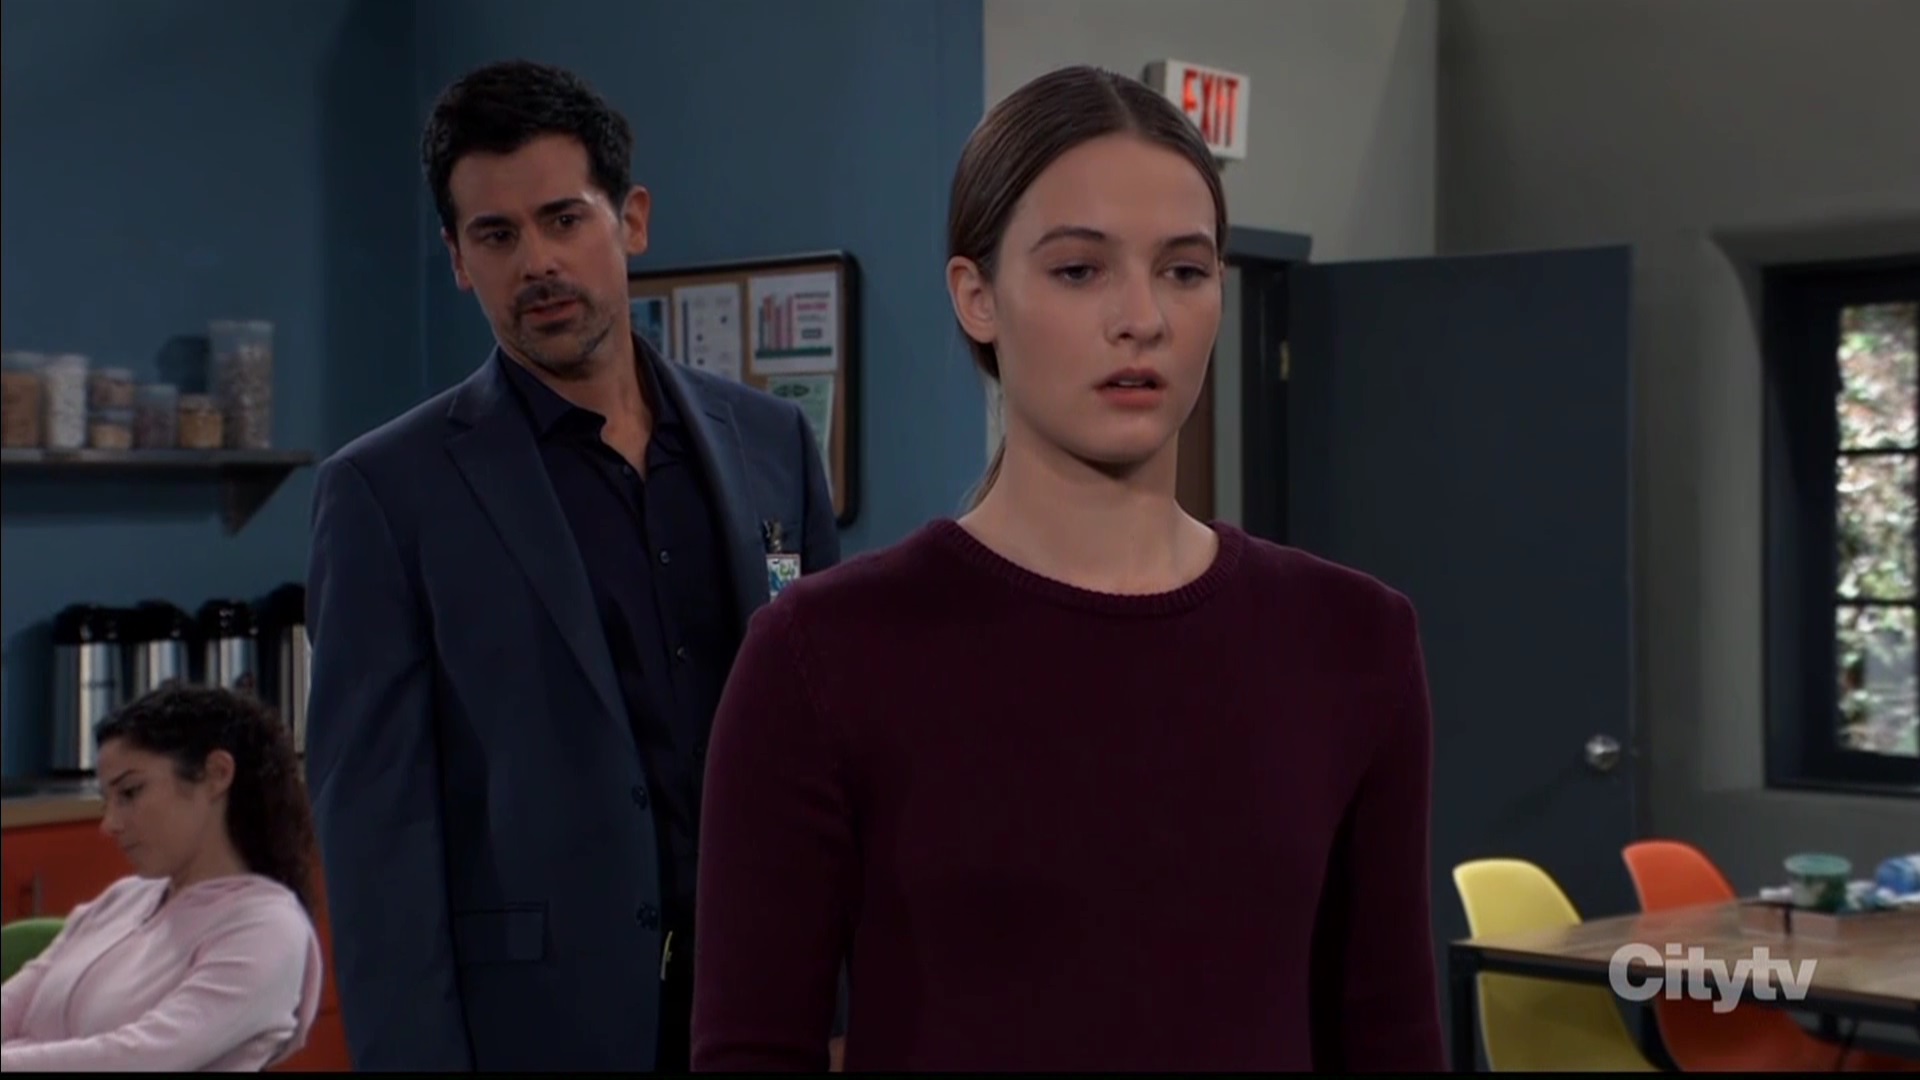 esme shocked her boyfriend's father her baby daddy GH recaps SoapsSpoilers